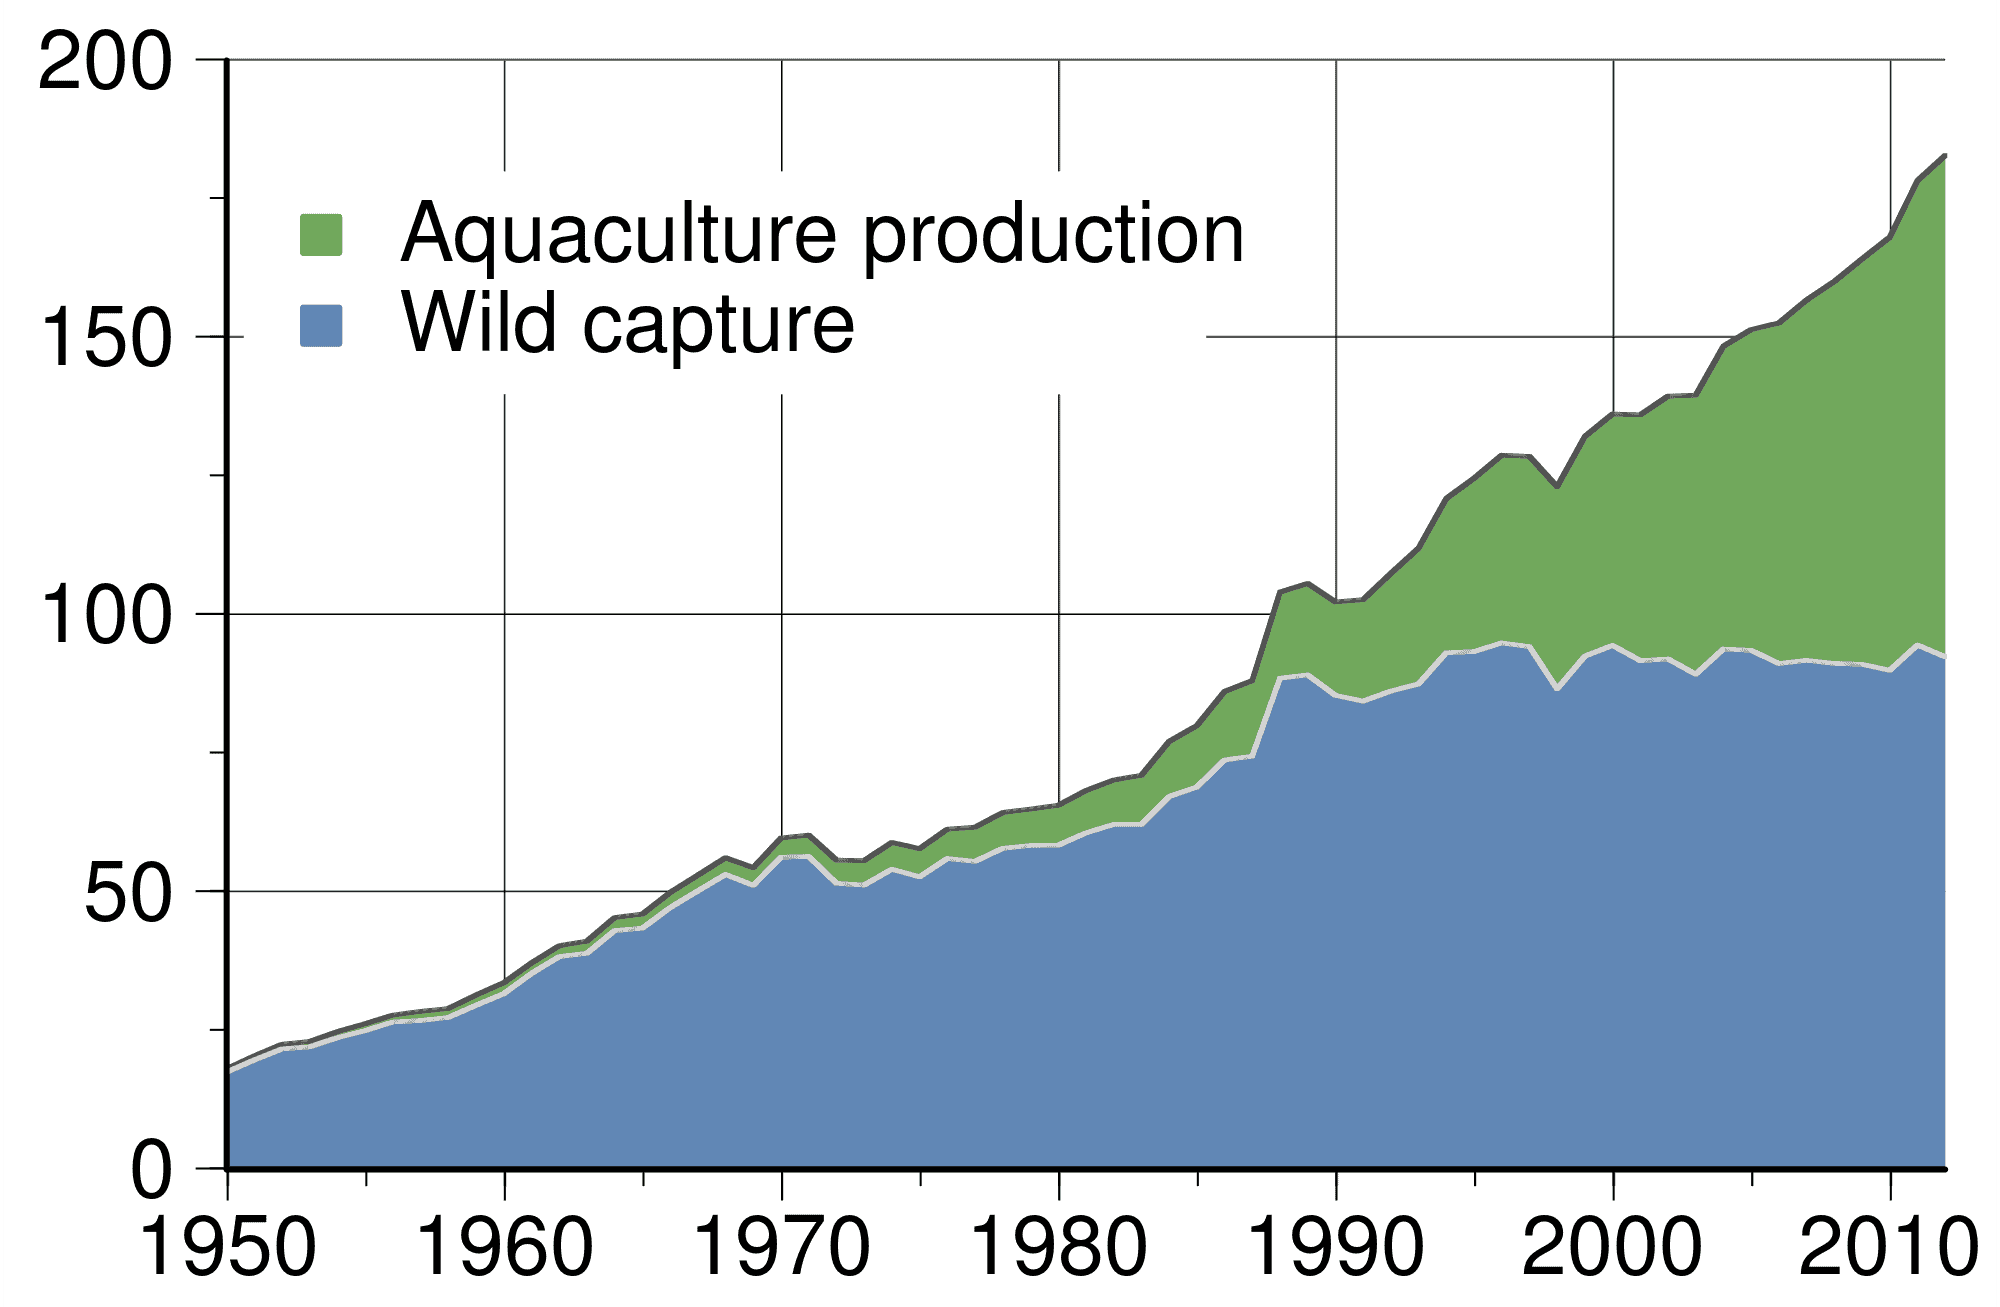 Global total wild fish capture and aquaculture production in million tonnes, as reported by the FAO.